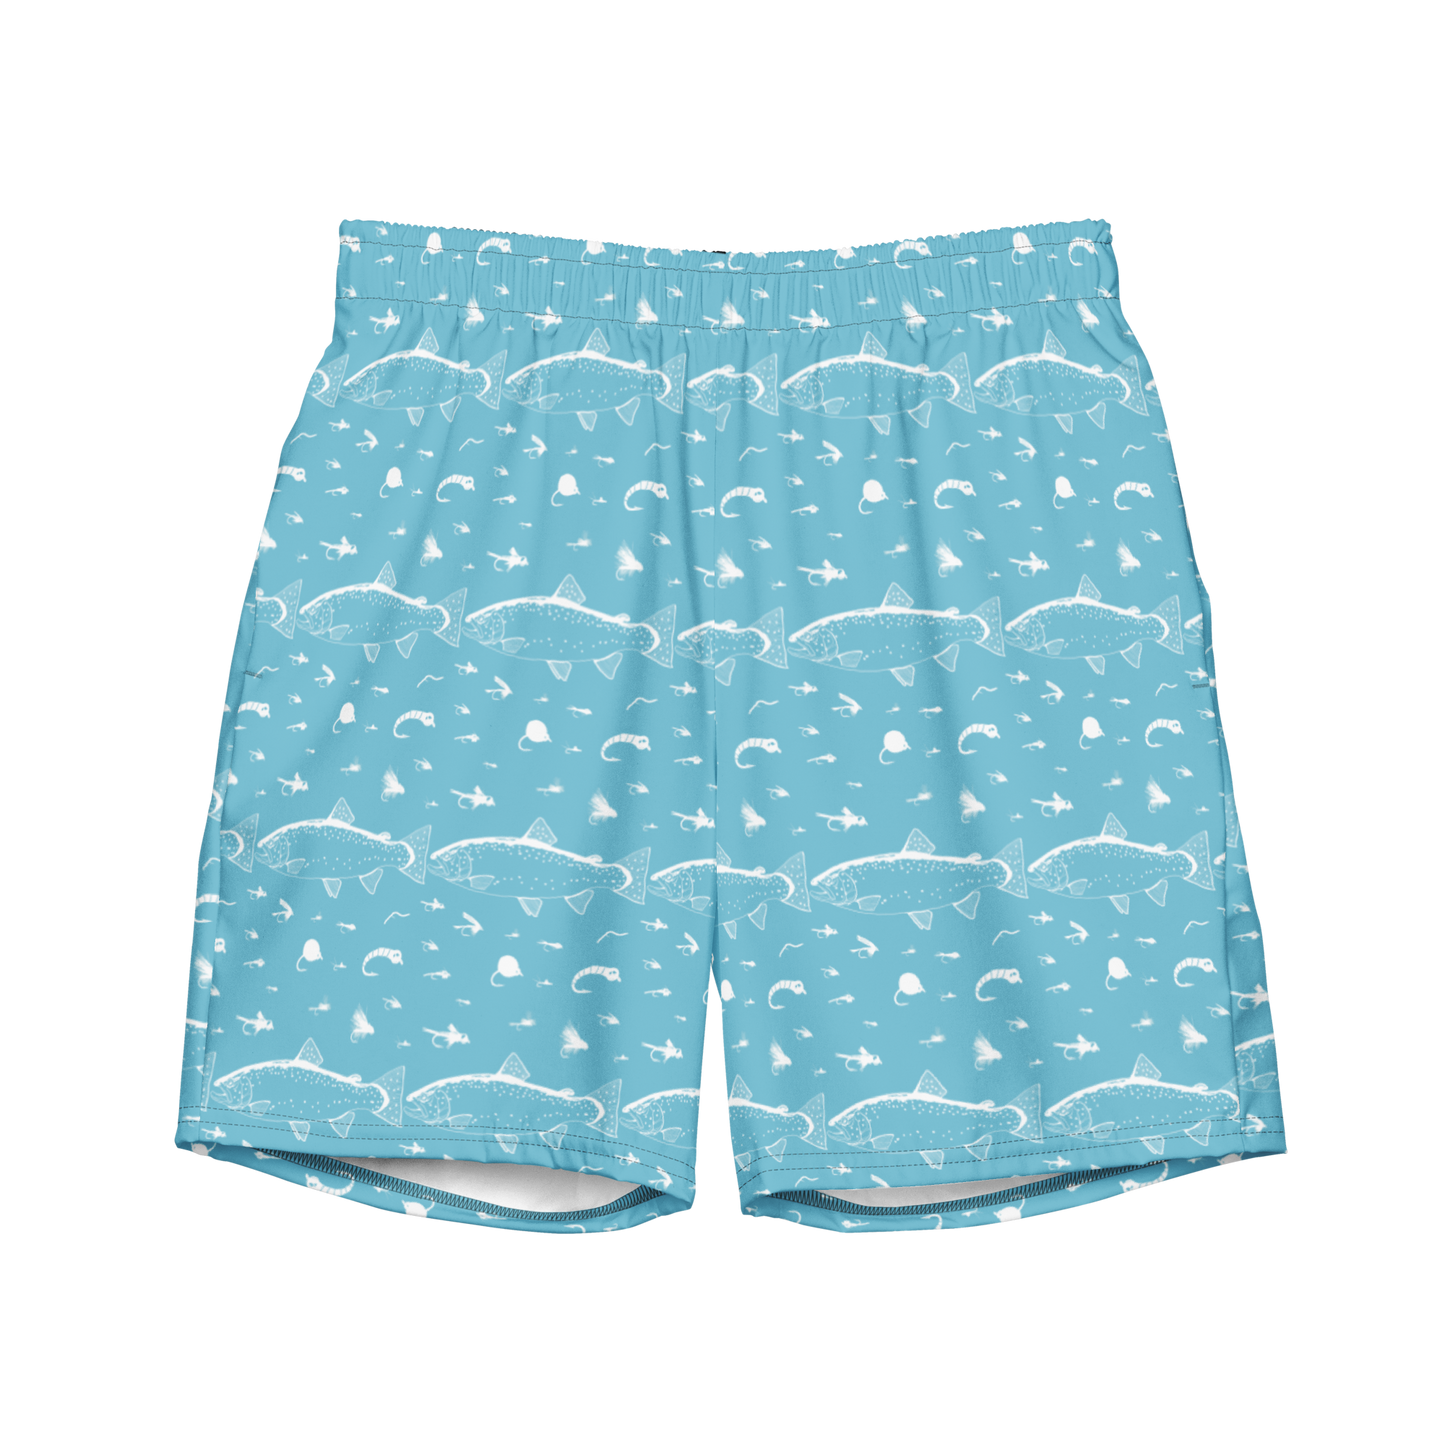 Blue fly fishing shorts / swim trunks. They have a pattern with trout and flies. Front side 